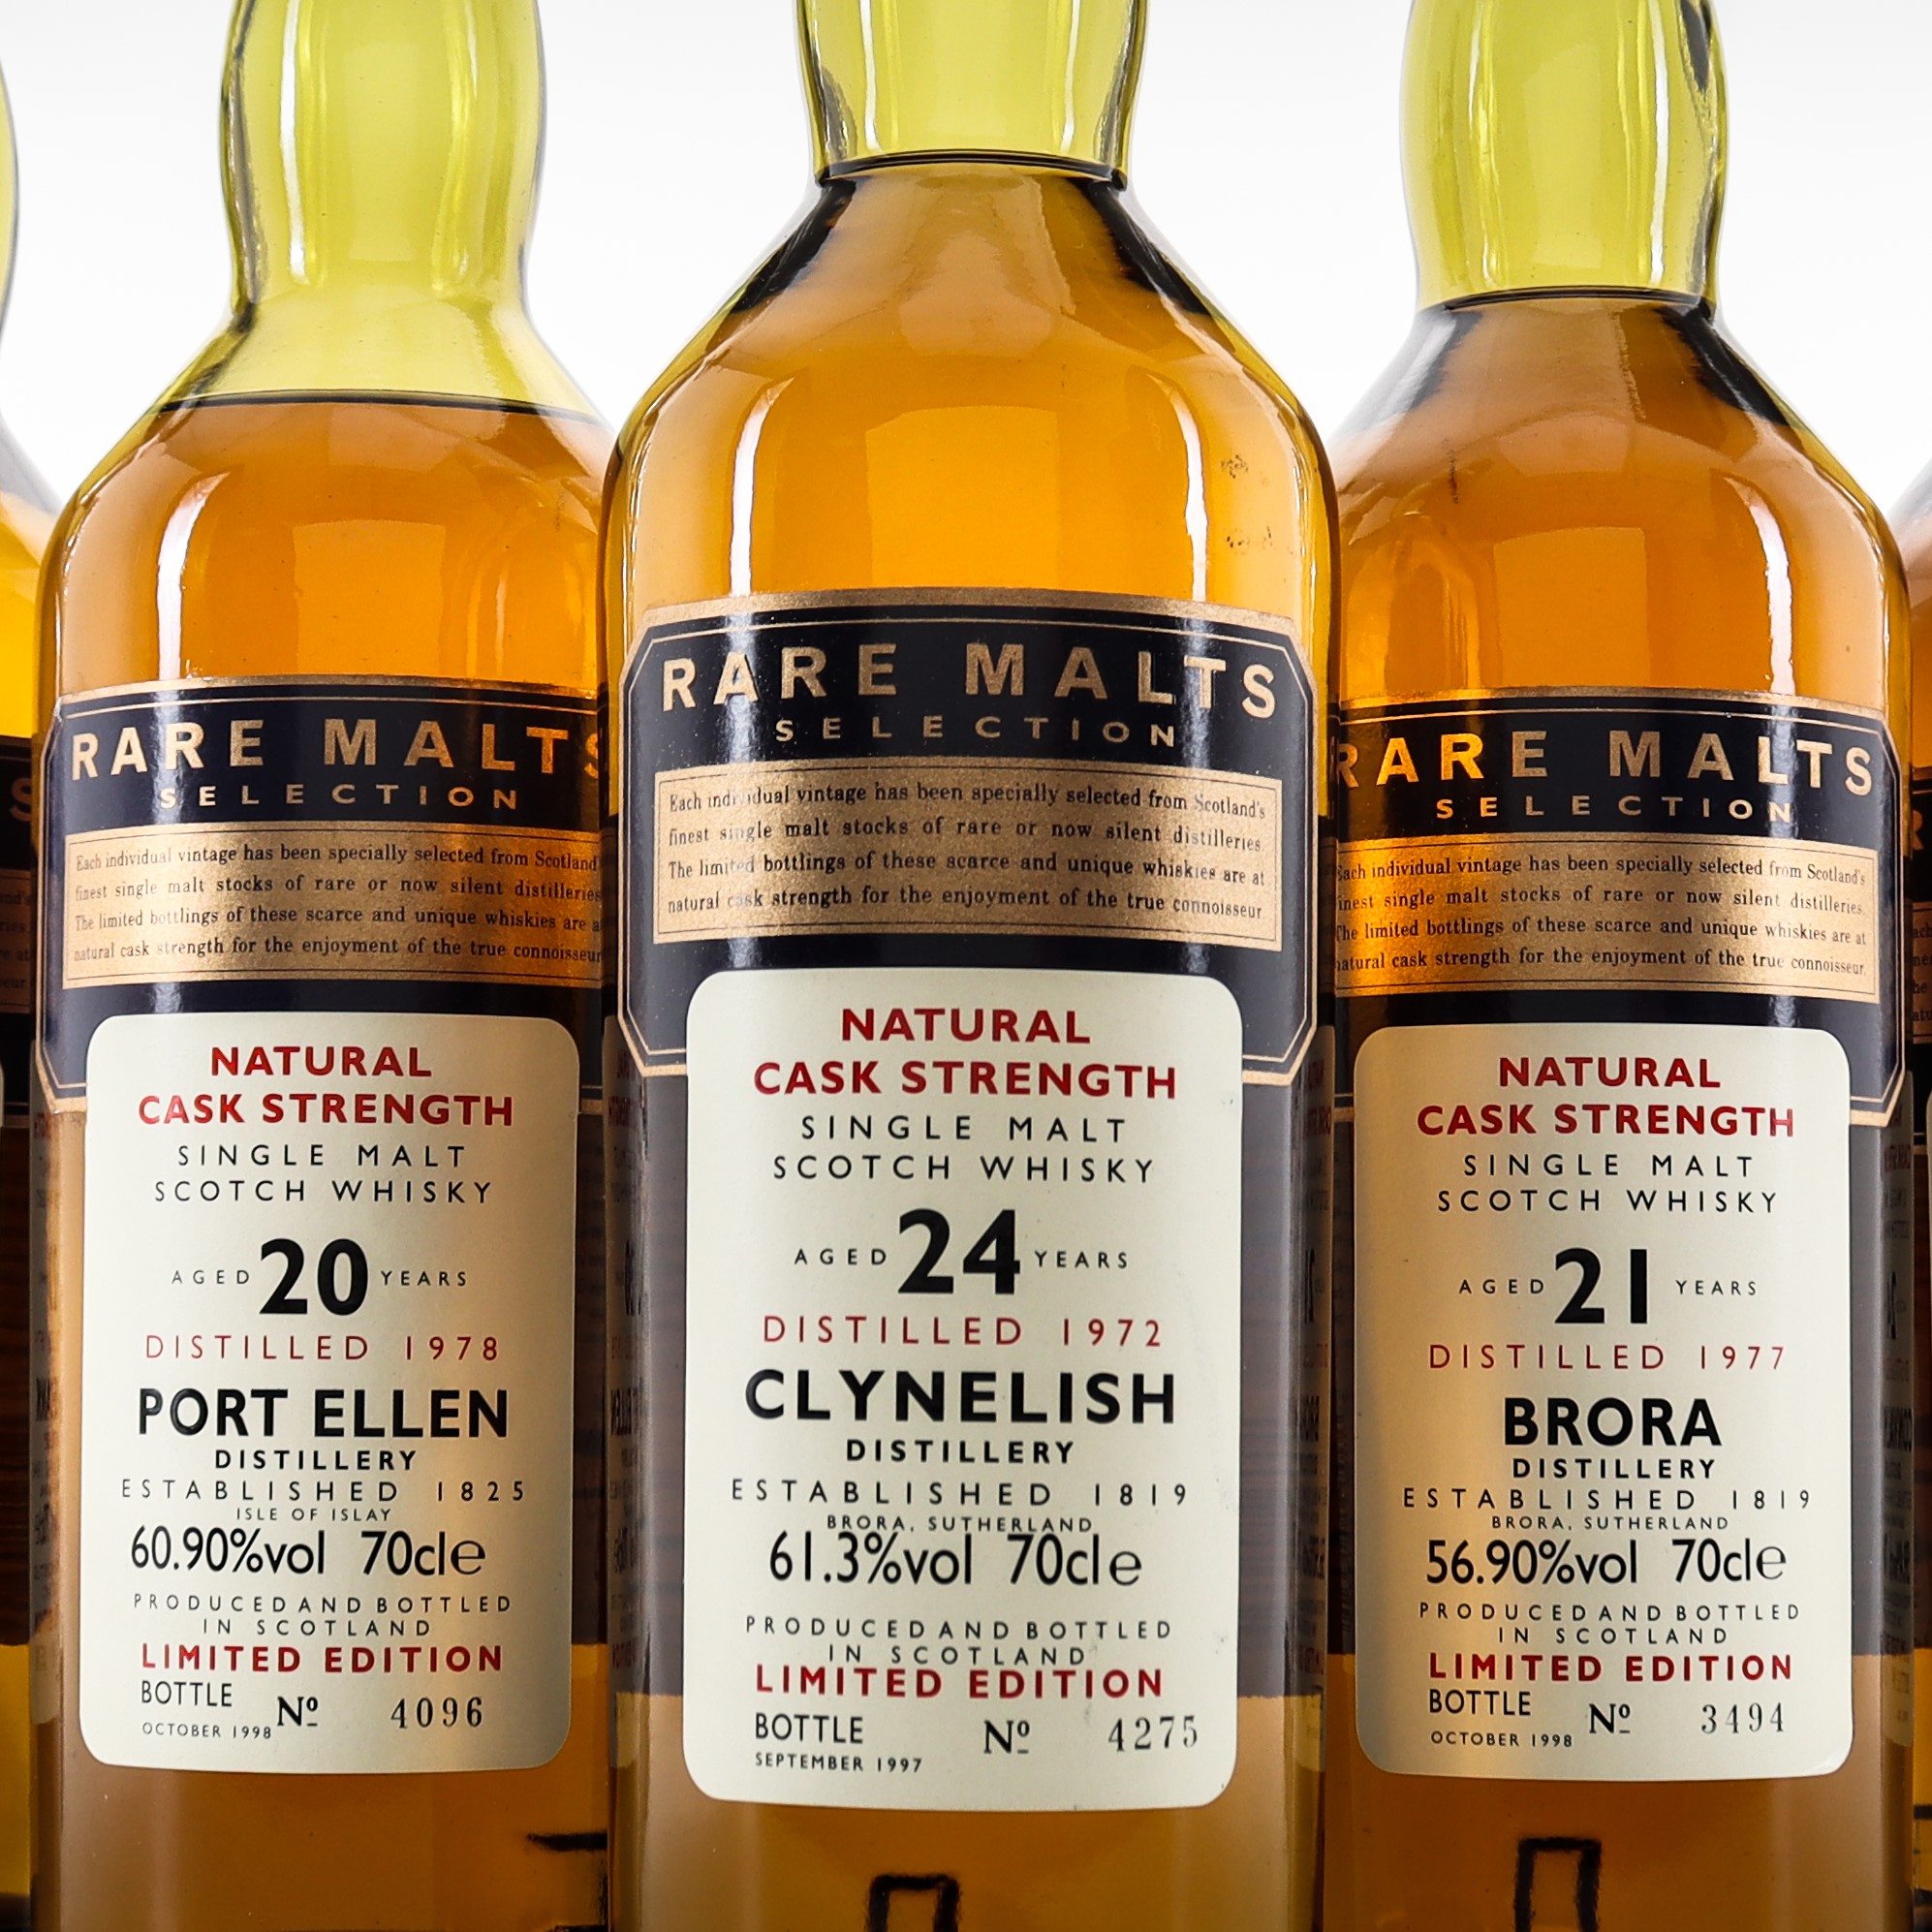 Whisky | The Rare Malts Collection